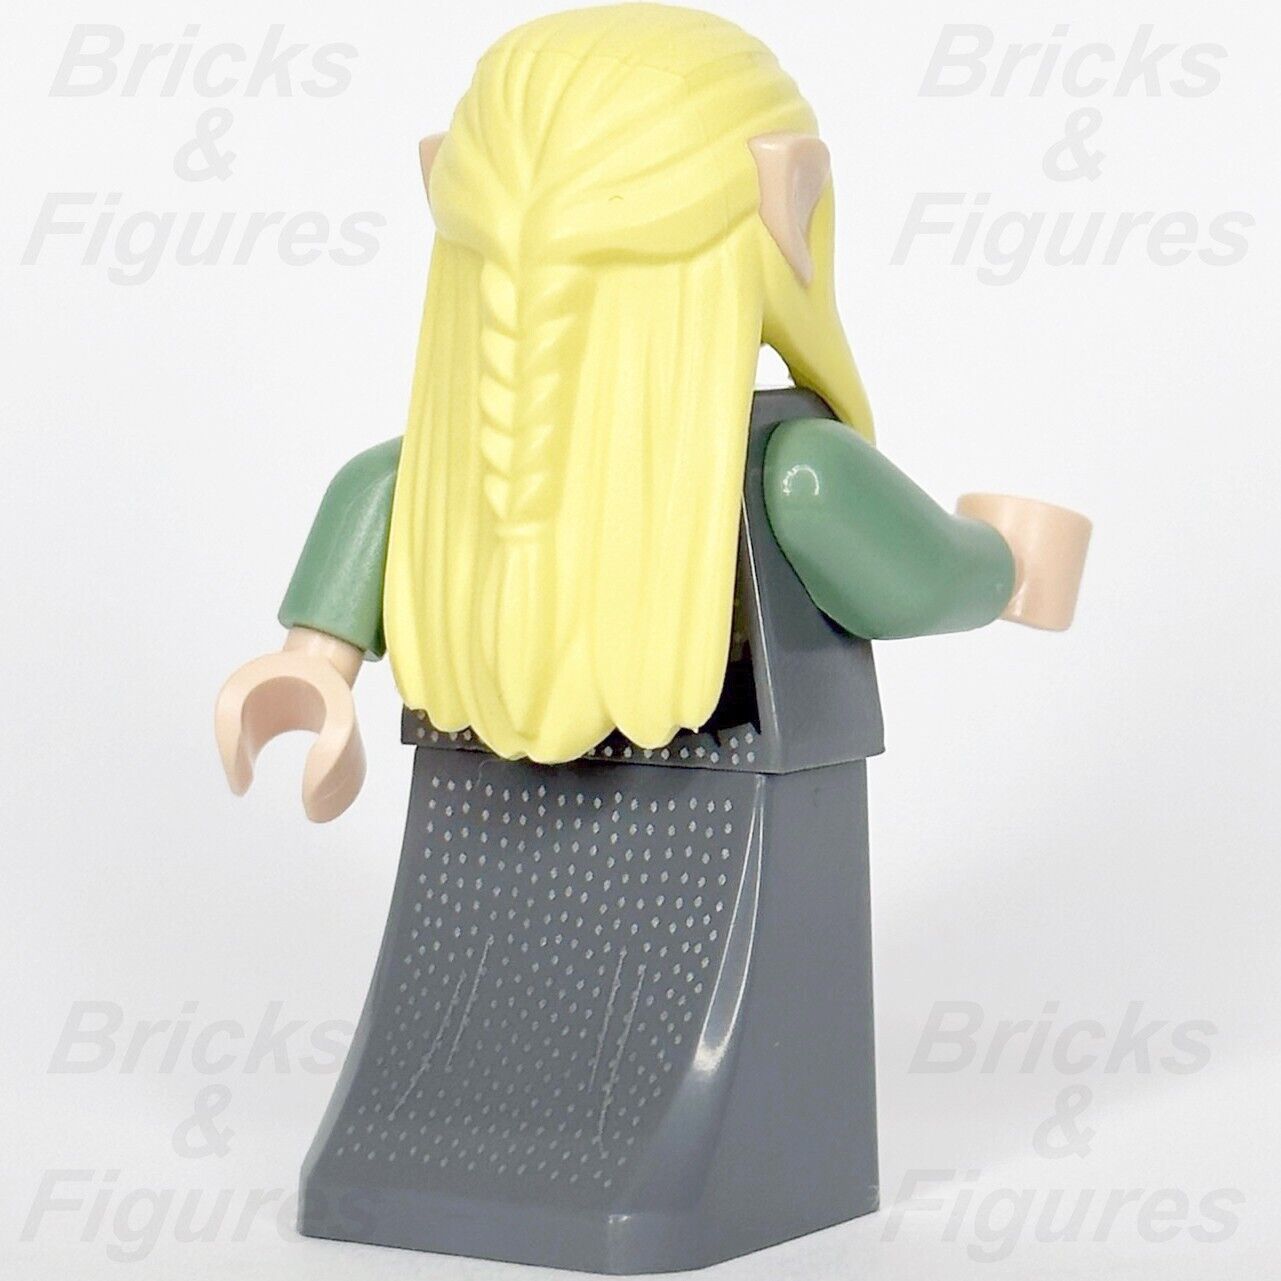 LEGO Rivendell Elf Minifigure The Hobbit & The Lord of the Rings 10316 lor120 - Bricks & Figures